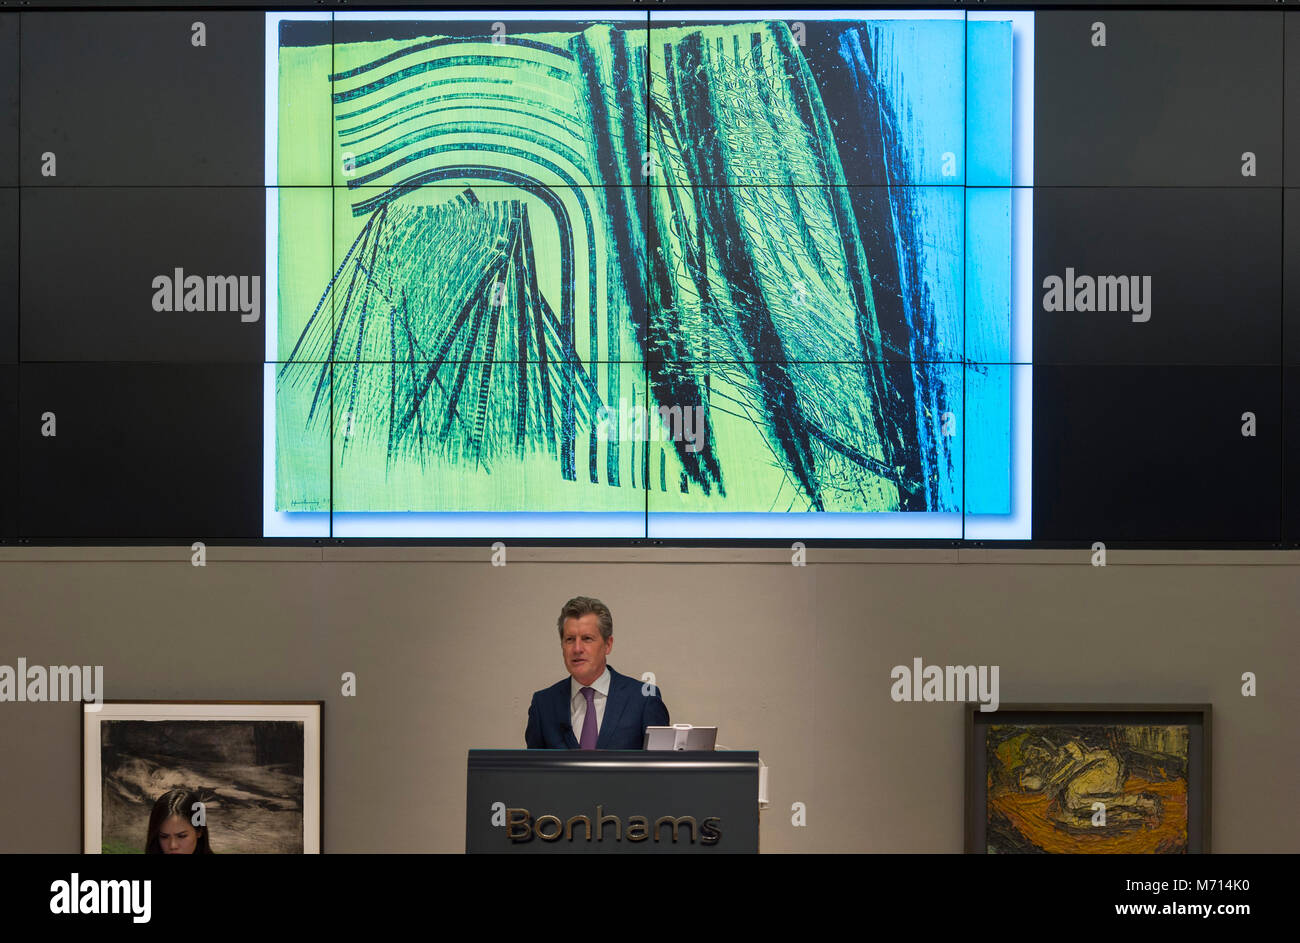 Bonhams, New Bond Street, London, UK. 7 March 2018. Hans Hartung’s T1971-E19 sells for £45,000 (excluding charges) in Bonhams Post-War & Contemporary Art sale. Credit: Malcolm Park/Alamy Live News. Stock Photo